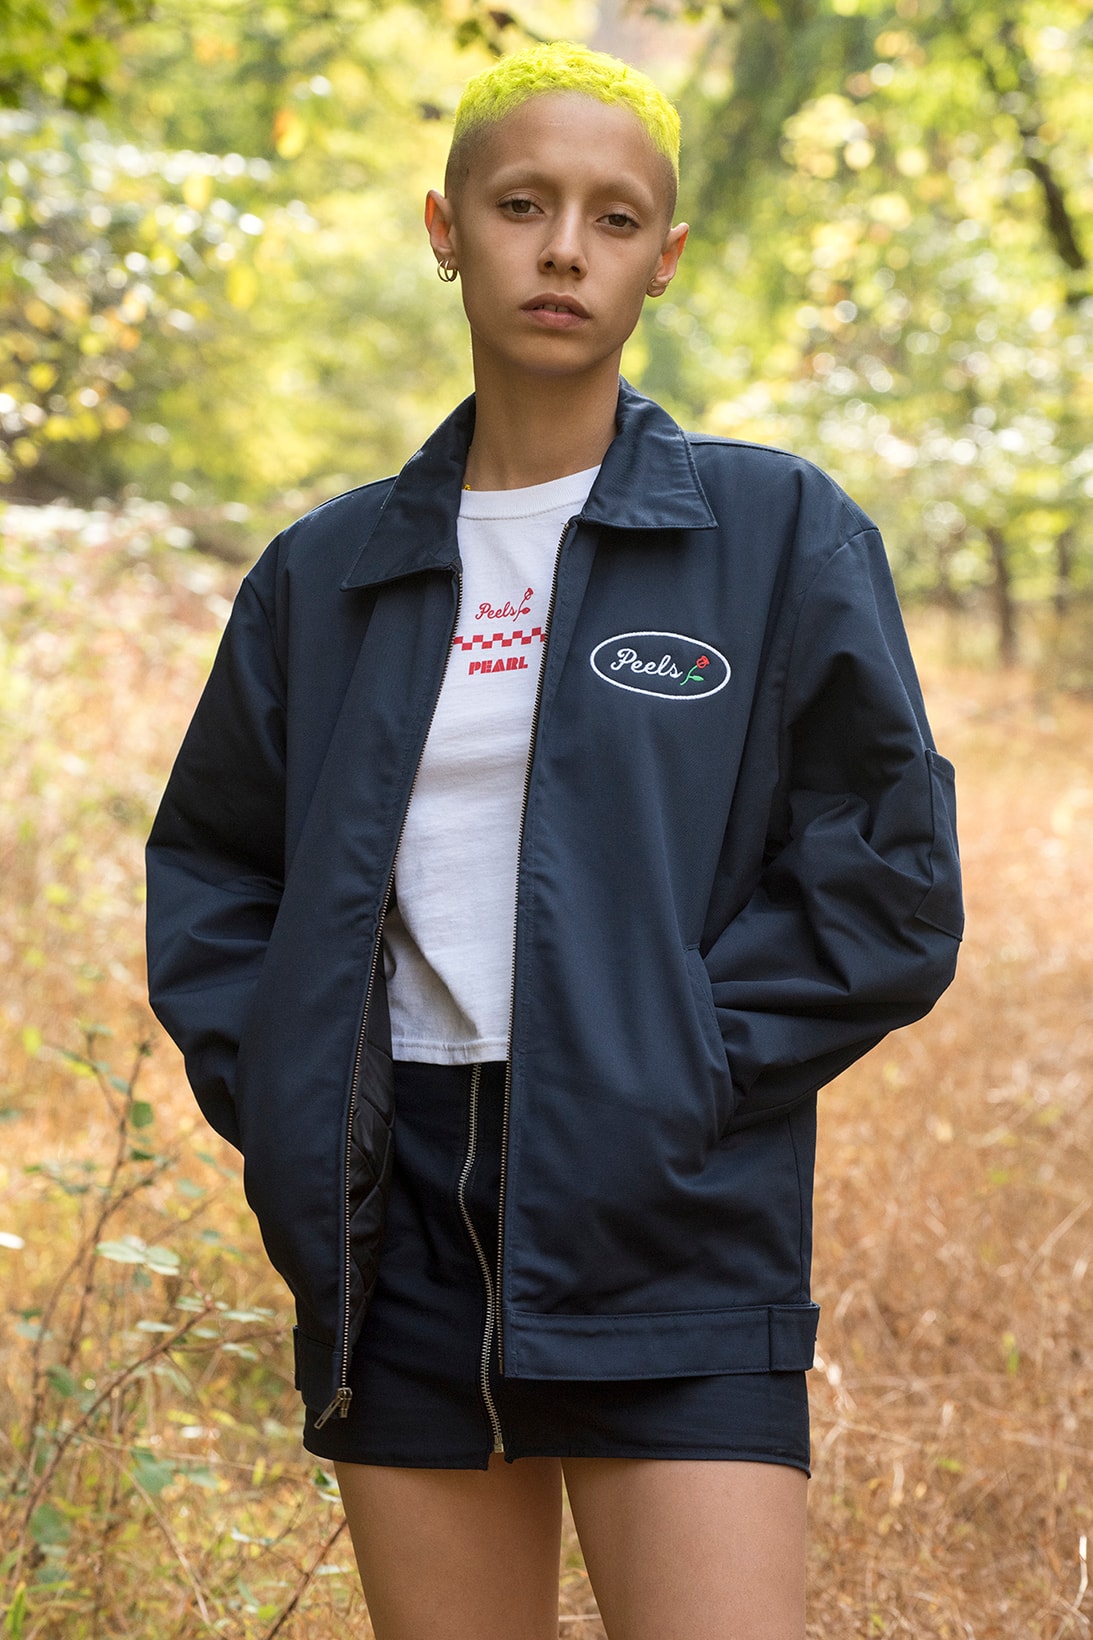 Peels NYC 2018 Spring Summer Lookbook Collection Patches Workshirts Menswear Womenswear